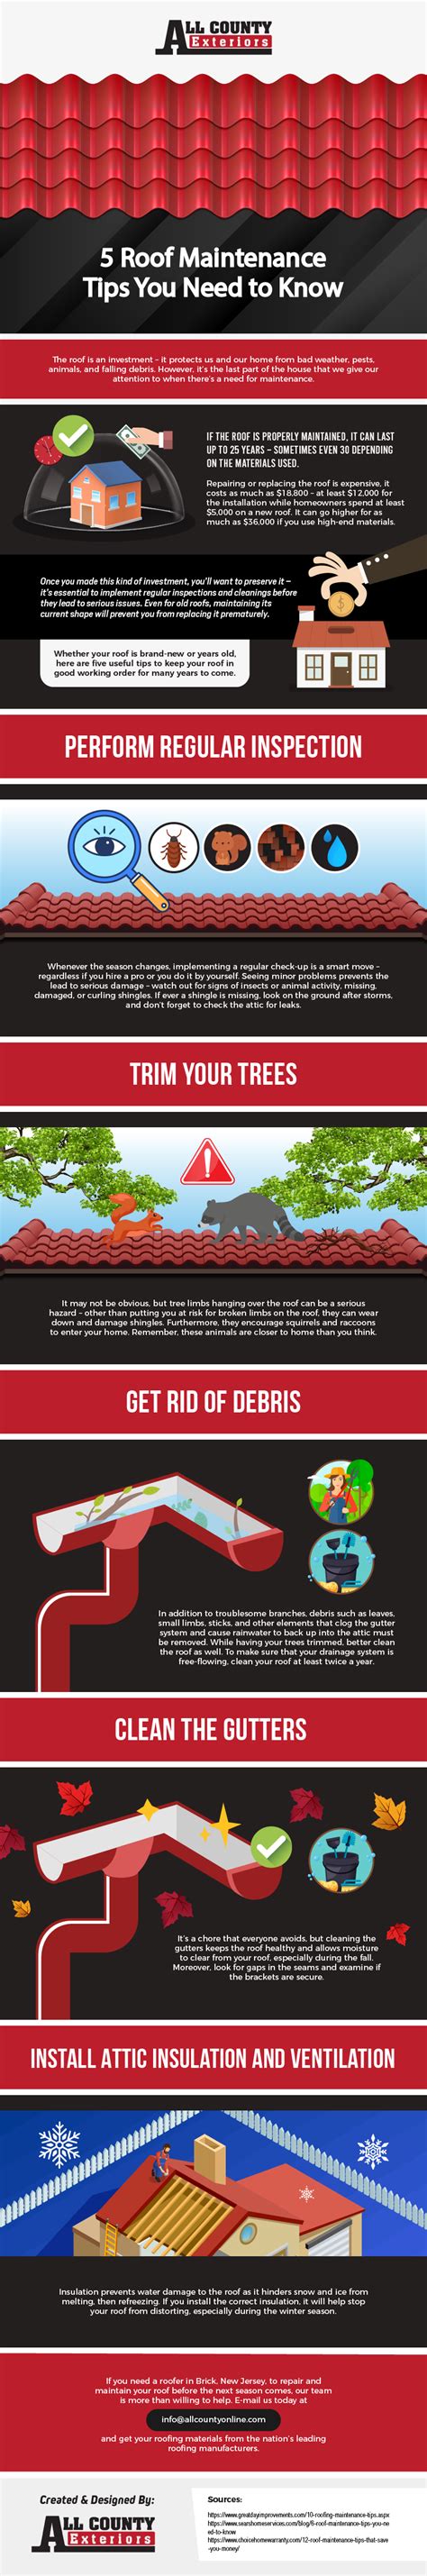 5 Roof Maintenance Tips You Need To Know Infographic